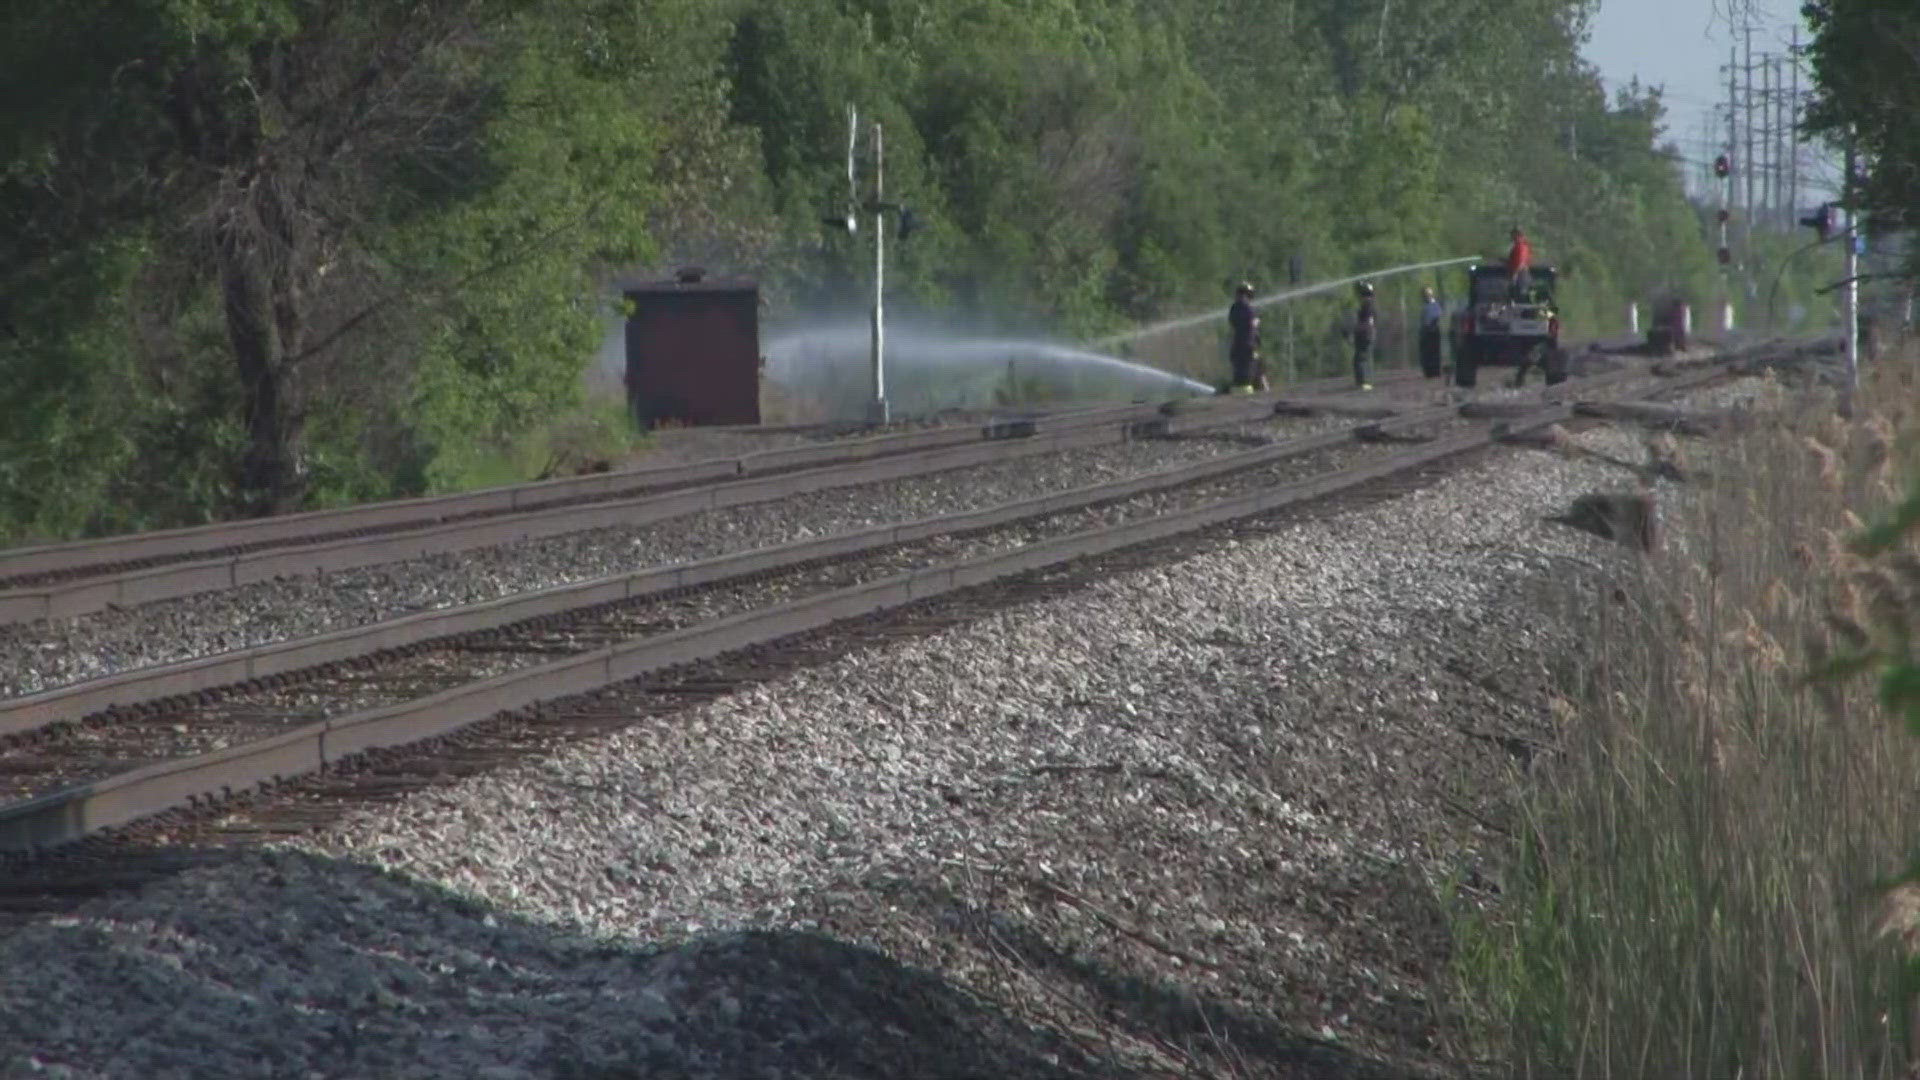 An investigation is underway after first responders were called to combat brush fires along train tracks in the City of Buffalo and surrounding areas.